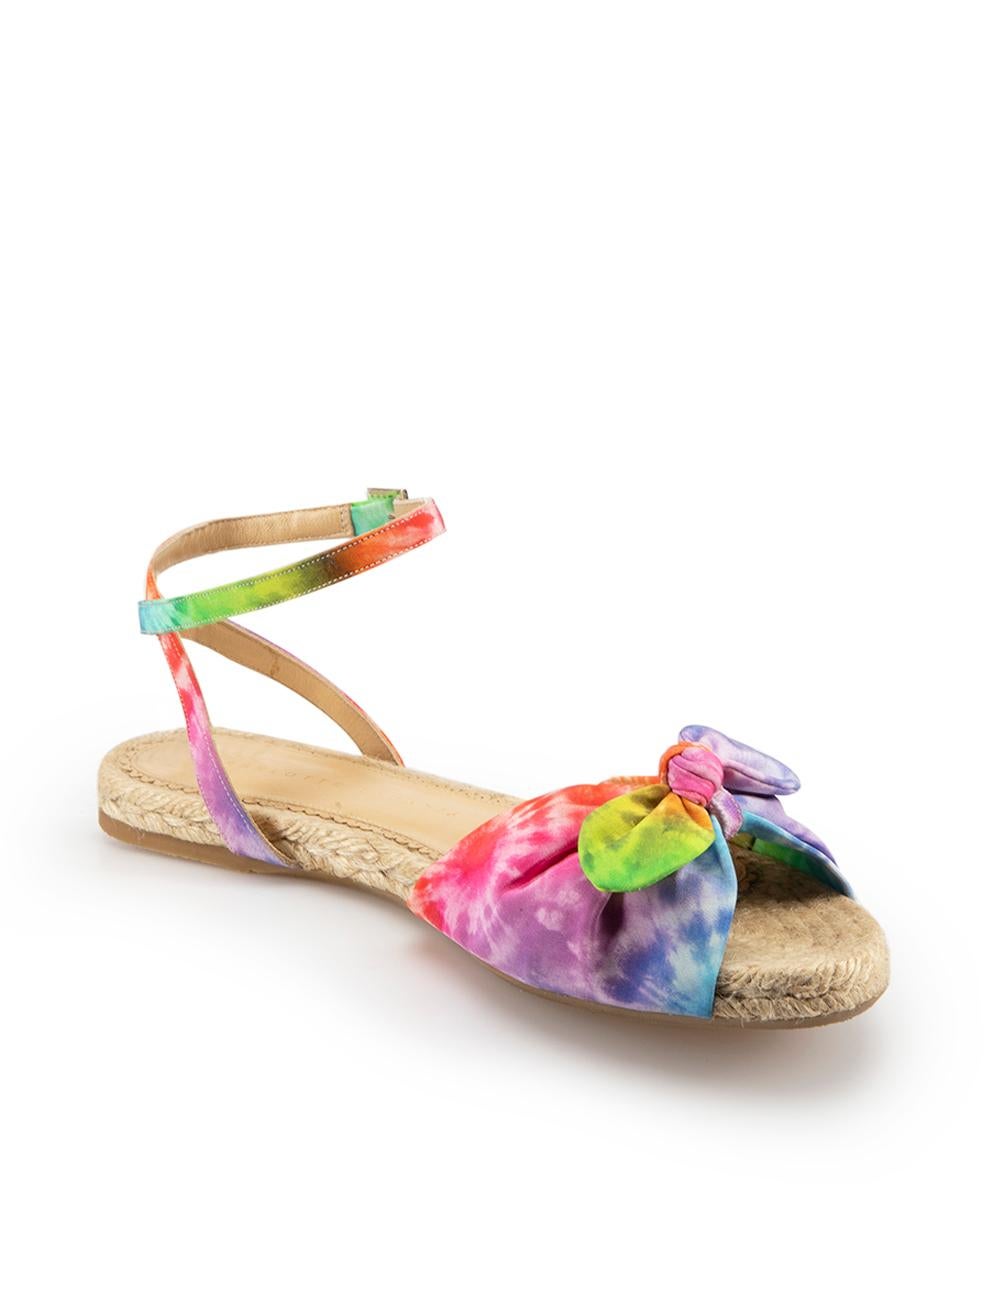 CONDITION is Very good. Minimal wear to sandals is evident. Minimal discoloured marks to inner sole on this used Charlotte Olympia designer resale item.



Details


Multicolour

Cloth

Espadrille sandals

Front bow detail

Wrap around adjustable